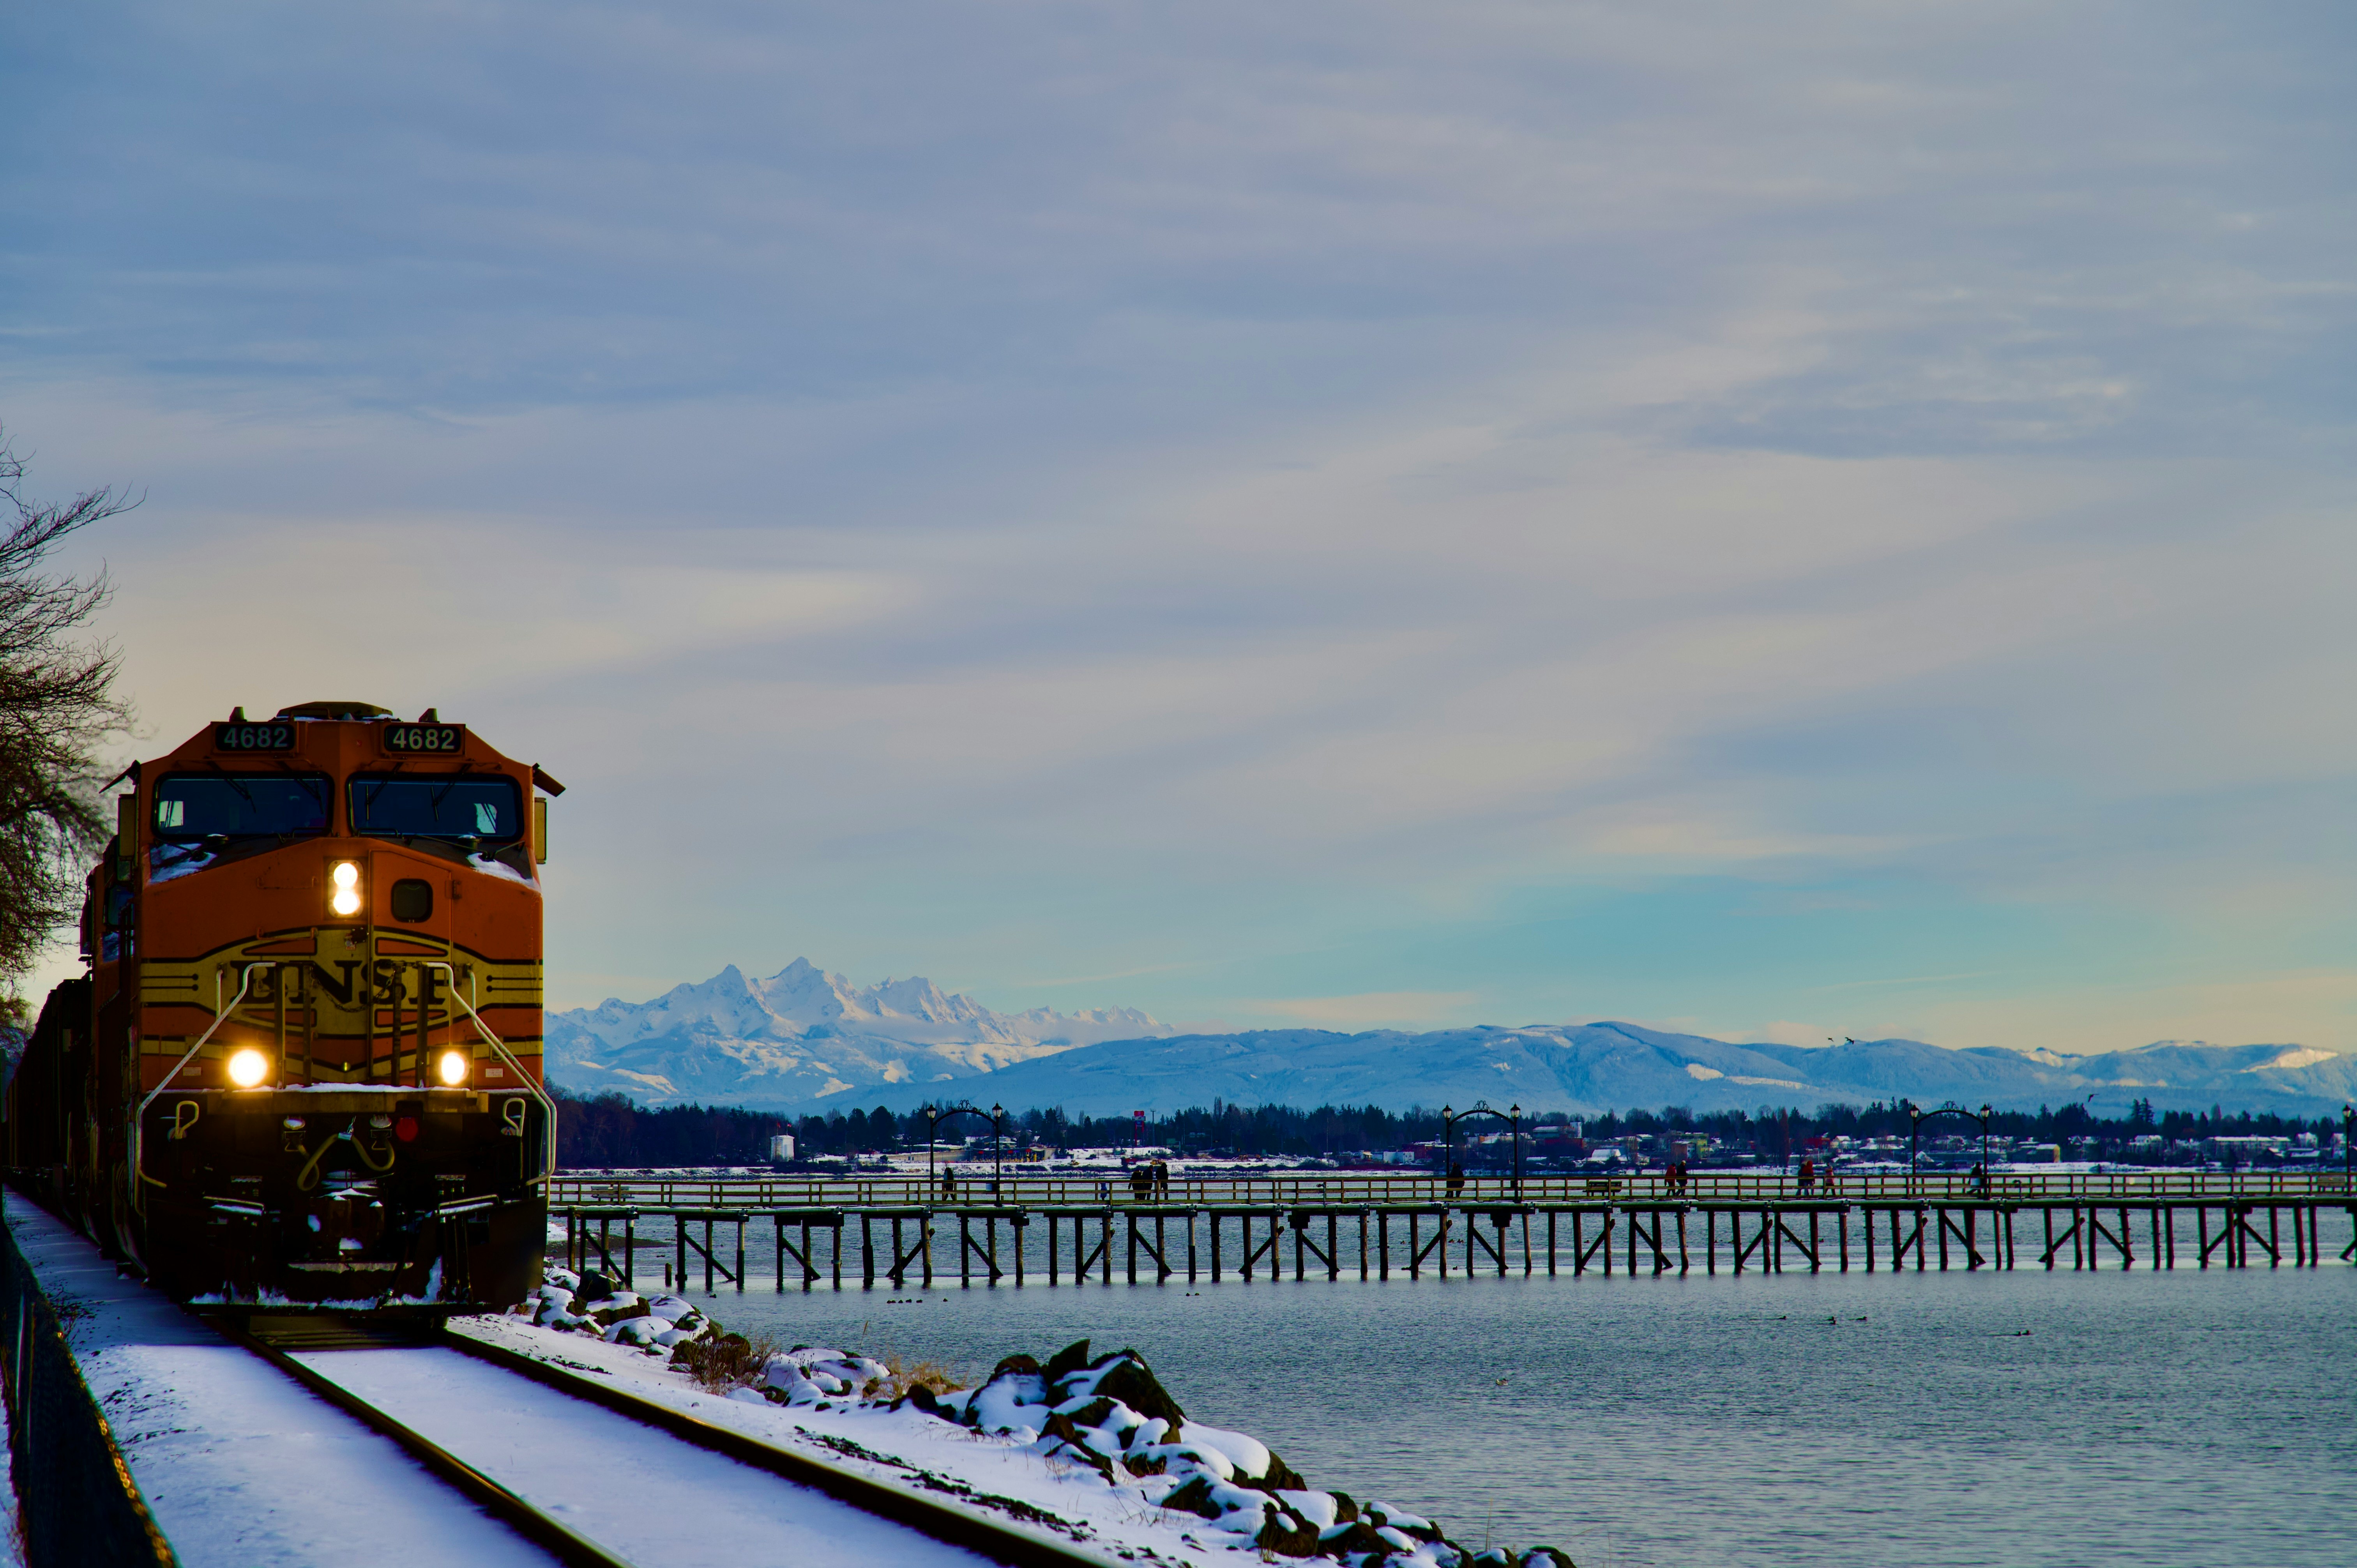 A train passing by White Rock, BC, Canada's longest pier.